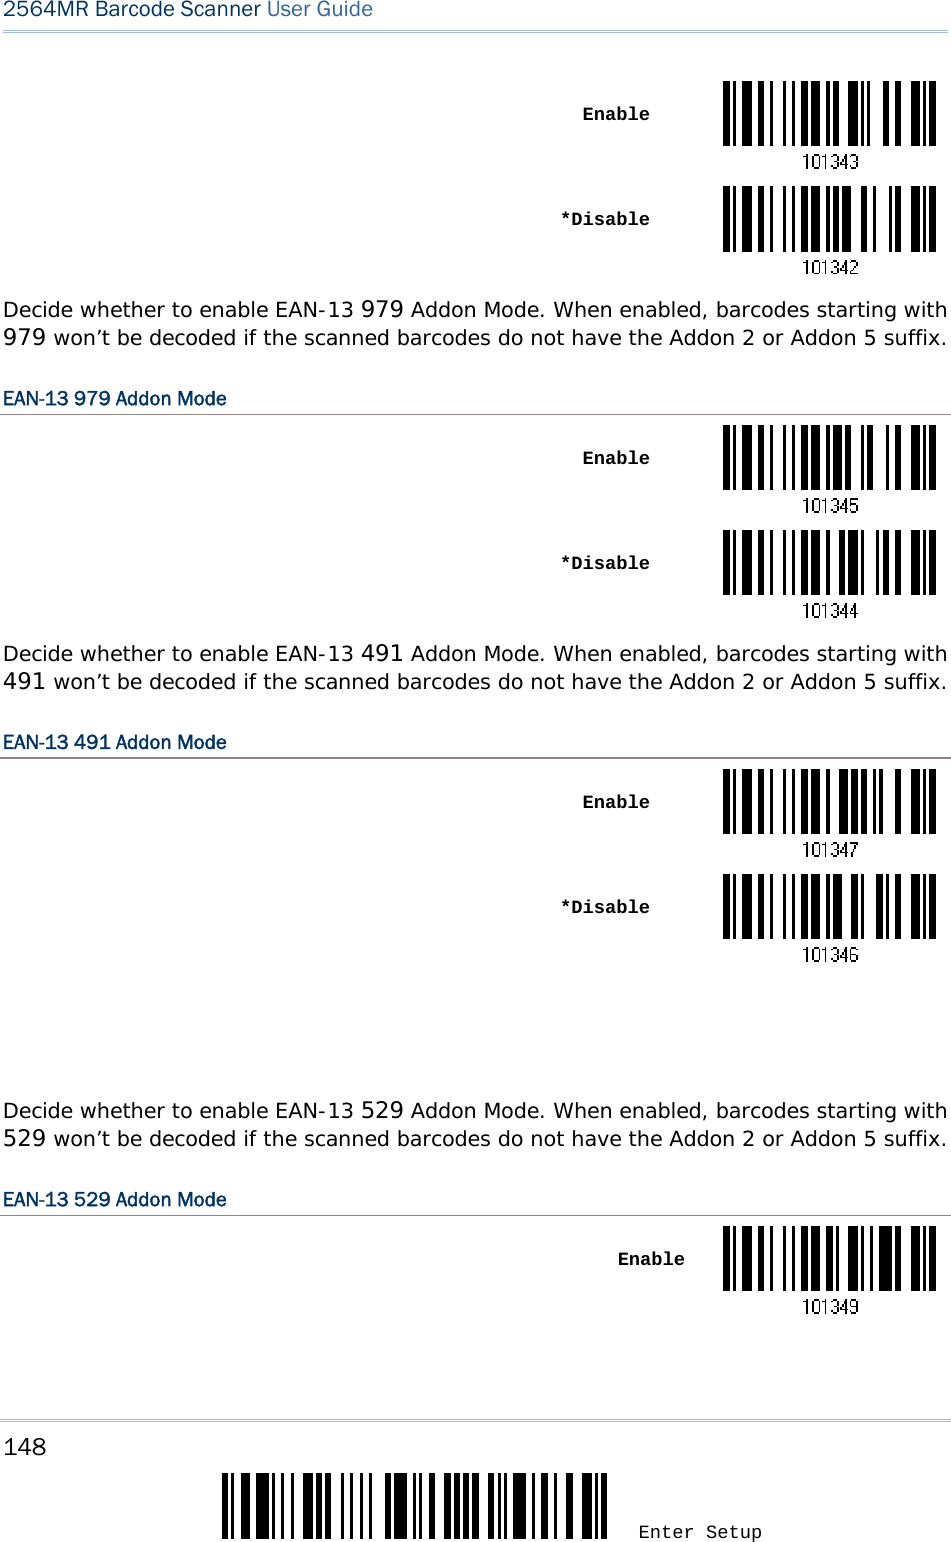 148 Enter Setup 2564MR Barcode Scanner User Guide   Enable *DisableDecide whether to enable EAN-13 979 Addon Mode. When enabled, barcodes starting with 979 won’t be decoded if the scanned barcodes do not have the Addon 2 or Addon 5 suffix. EAN-13 979 Addon Mode  Enable *DisableDecide whether to enable EAN-13 491 Addon Mode. When enabled, barcodes starting with 491 won’t be decoded if the scanned barcodes do not have the Addon 2 or Addon 5 suffix. EAN-13 491 Addon Mode  Enable *Disable   Decide whether to enable EAN-13 529 Addon Mode. When enabled, barcodes starting with 529 won’t be decoded if the scanned barcodes do not have the Addon 2 or Addon 5 suffix. EAN-13 529 Addon Mode  Enable